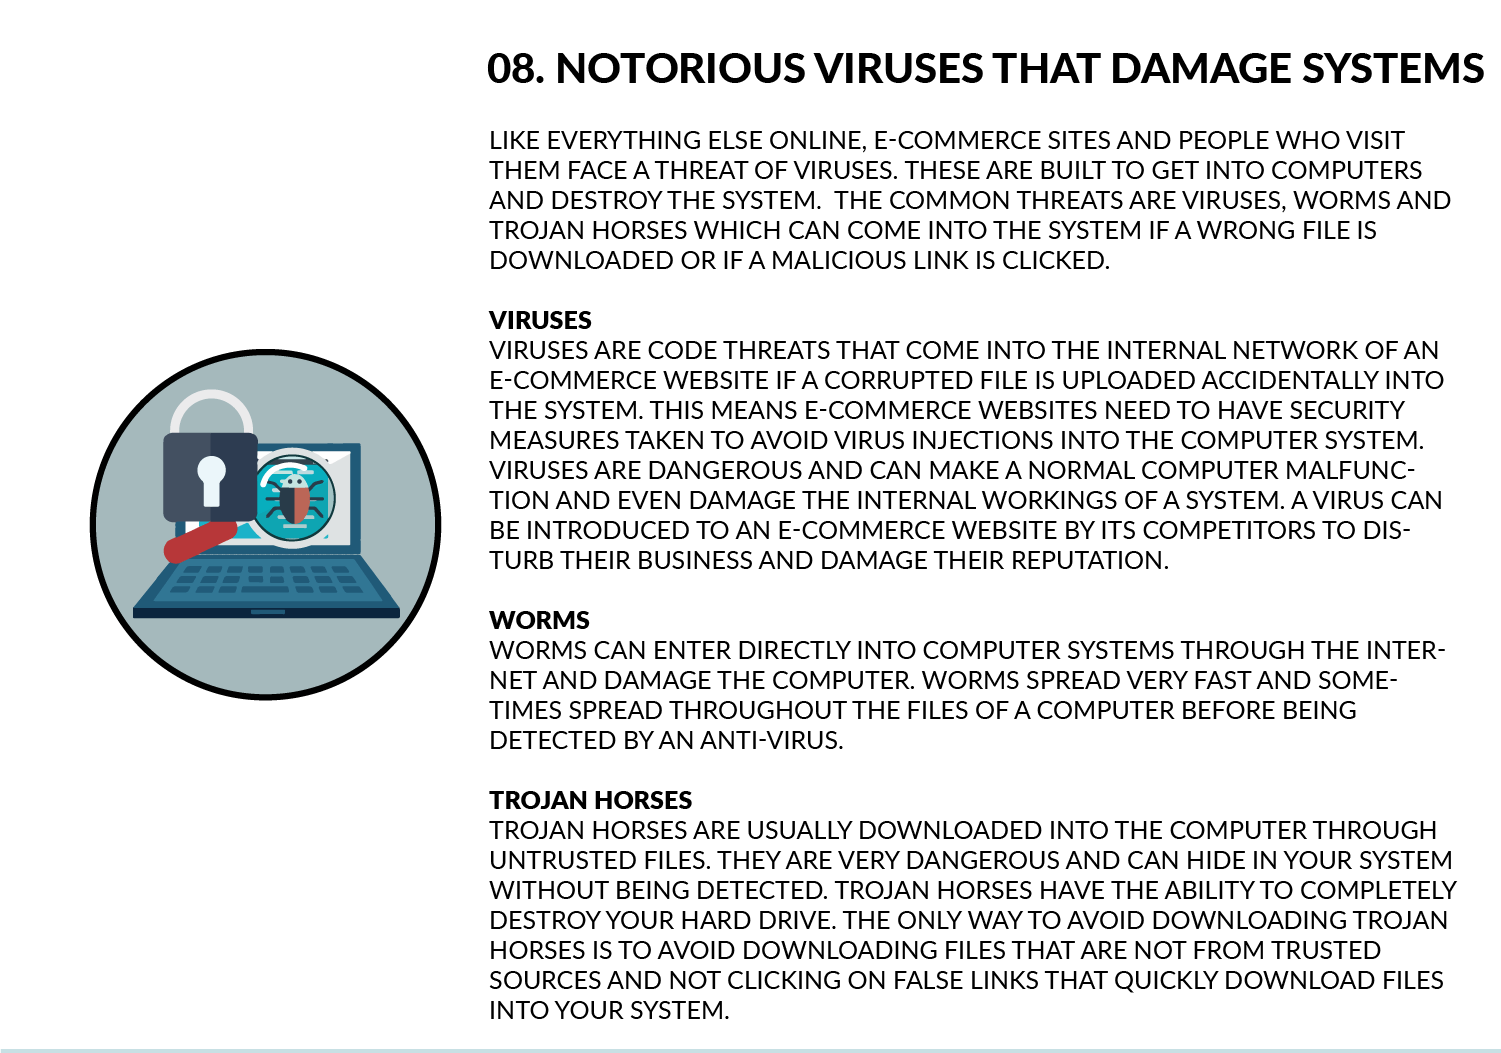 Notorious Viruses that Damage Systems